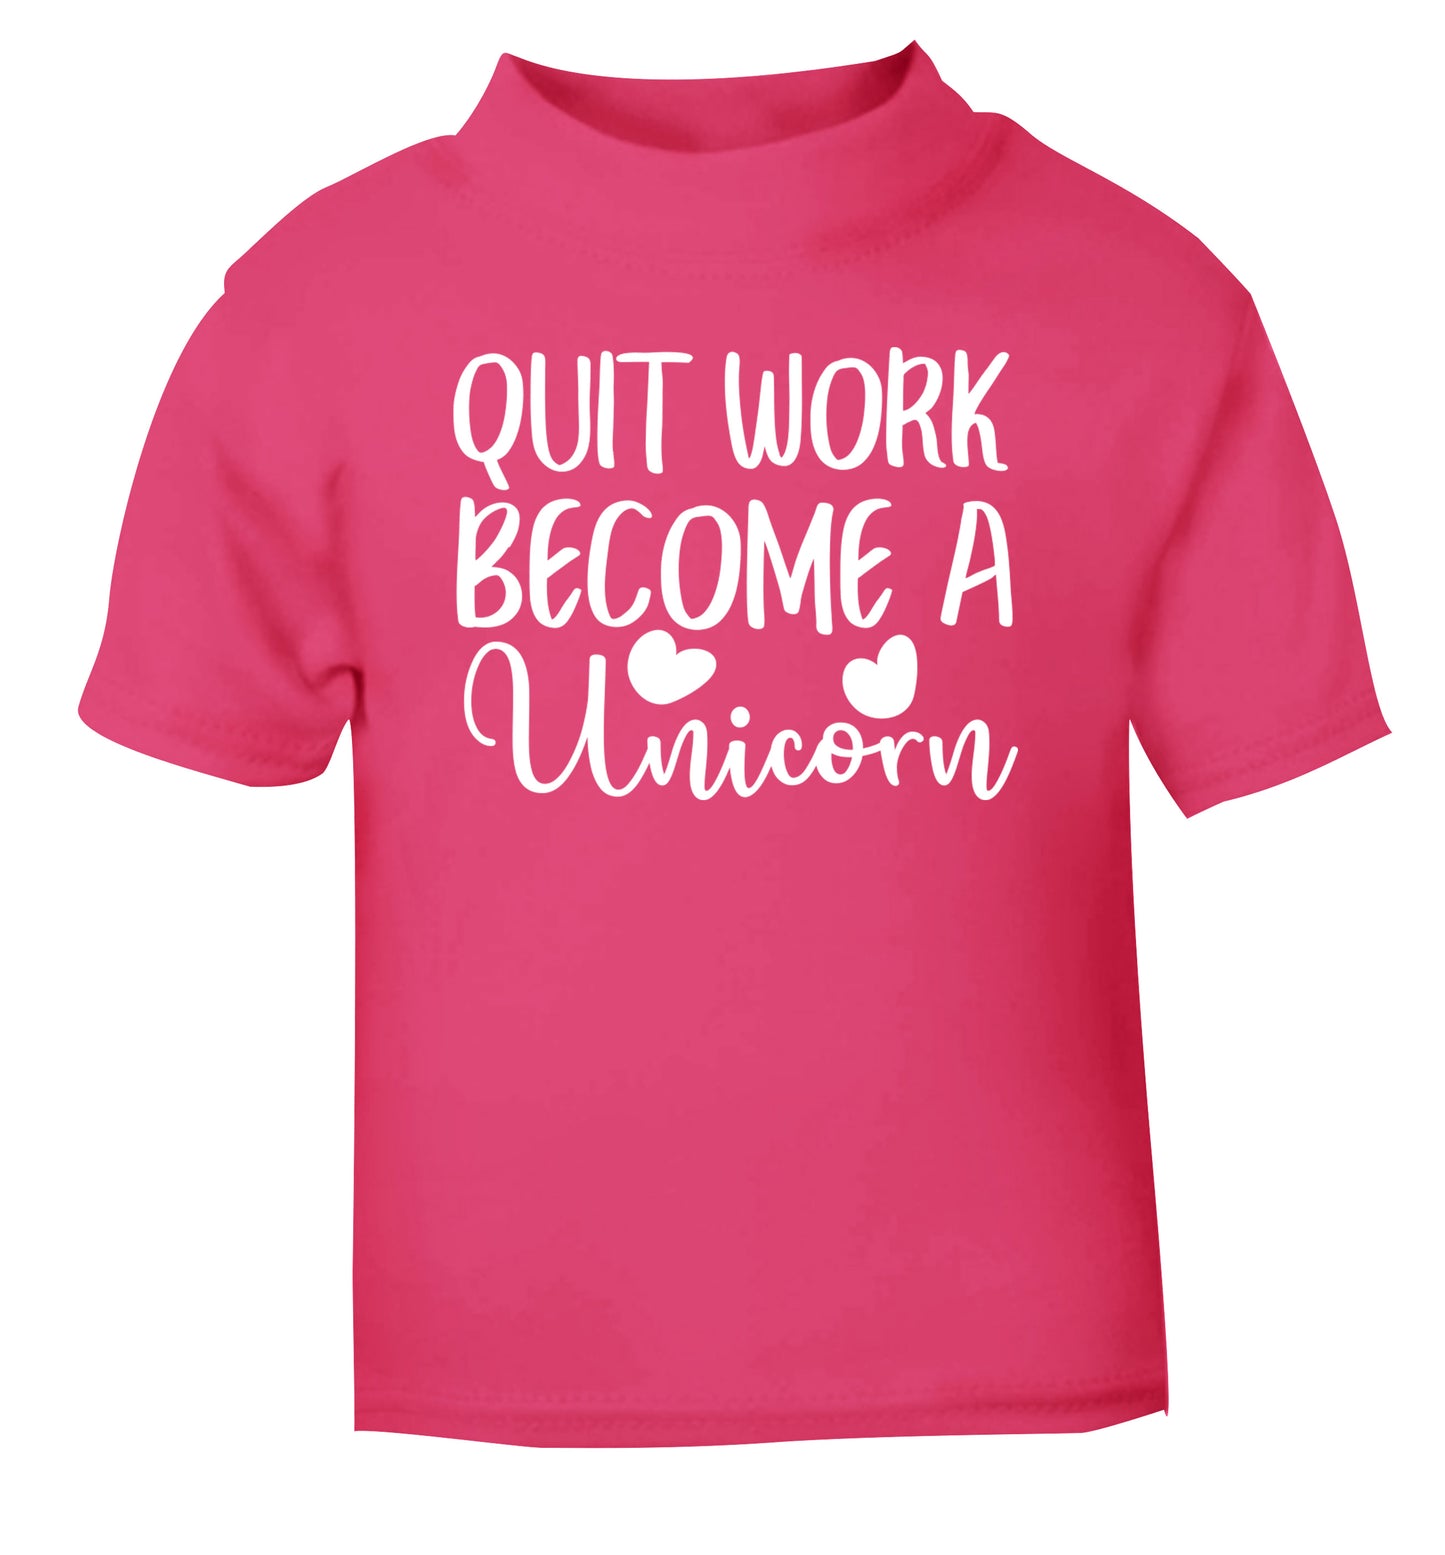 Quit work become a unicorn pink Baby Toddler Tshirt 2 Years